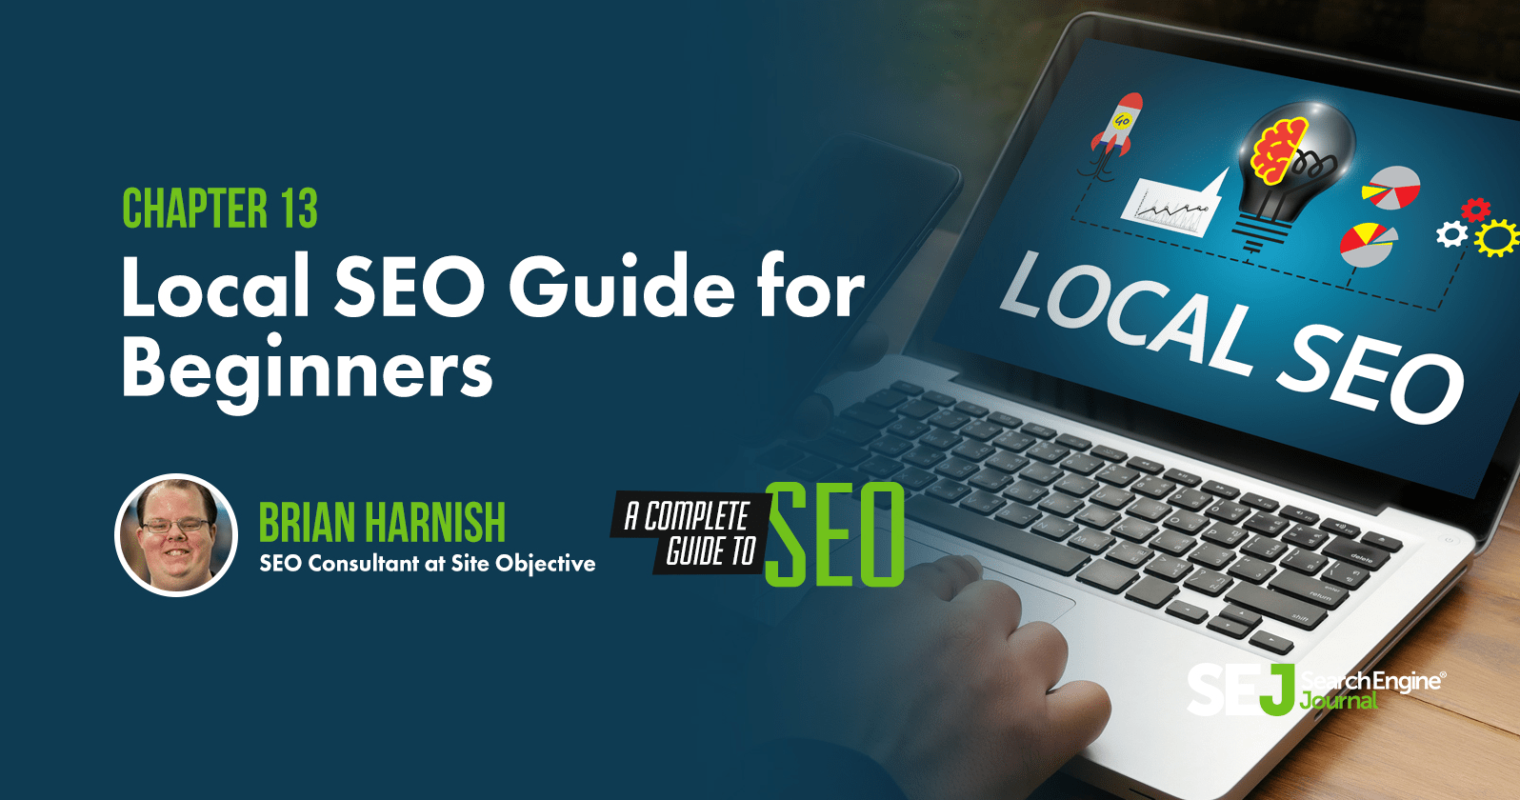 Local SEO for Beginners: How to Get Started